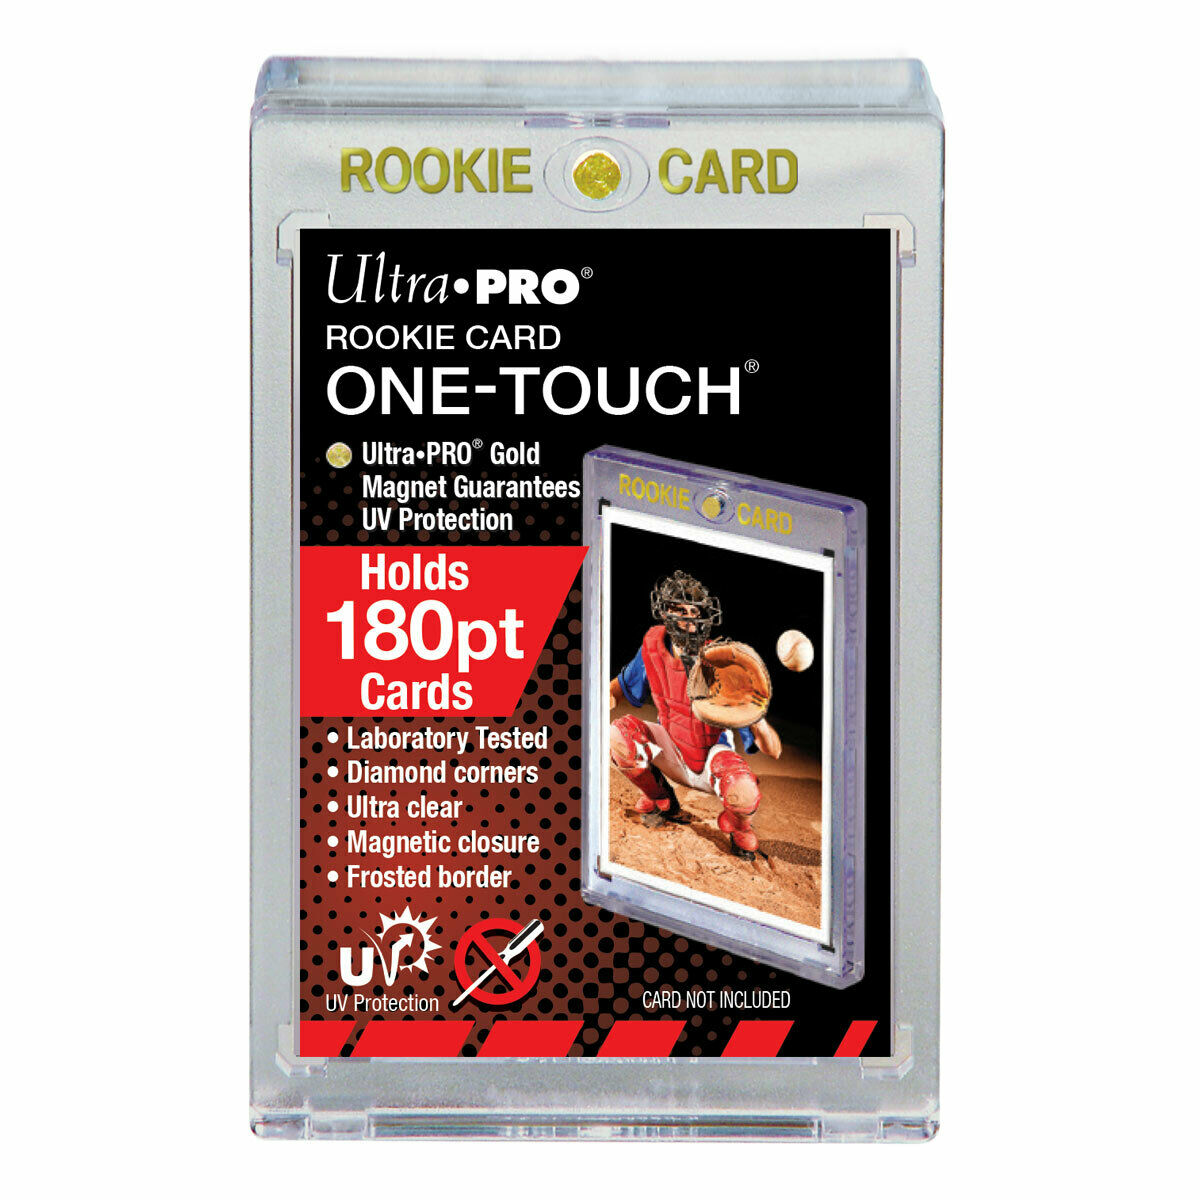 ULTRA PRO 1 TOUCH 180PT GOLD "ROOKIE CARD" MAGNETIC HOLDER